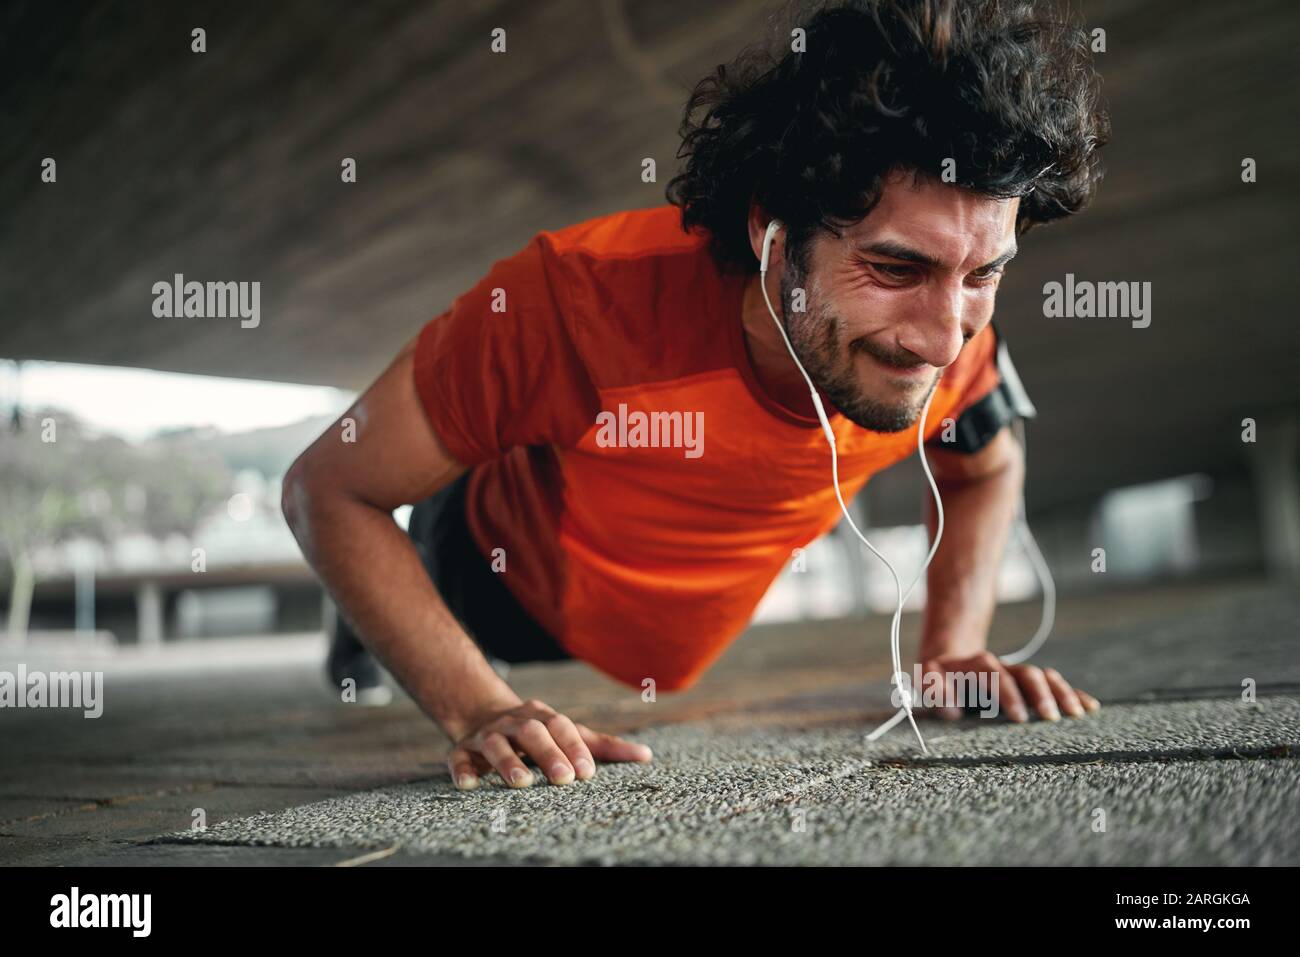 Young sportsman with earphones with painful face expression squeezed last push up - highly motivated and determined athlete  Stock Photo